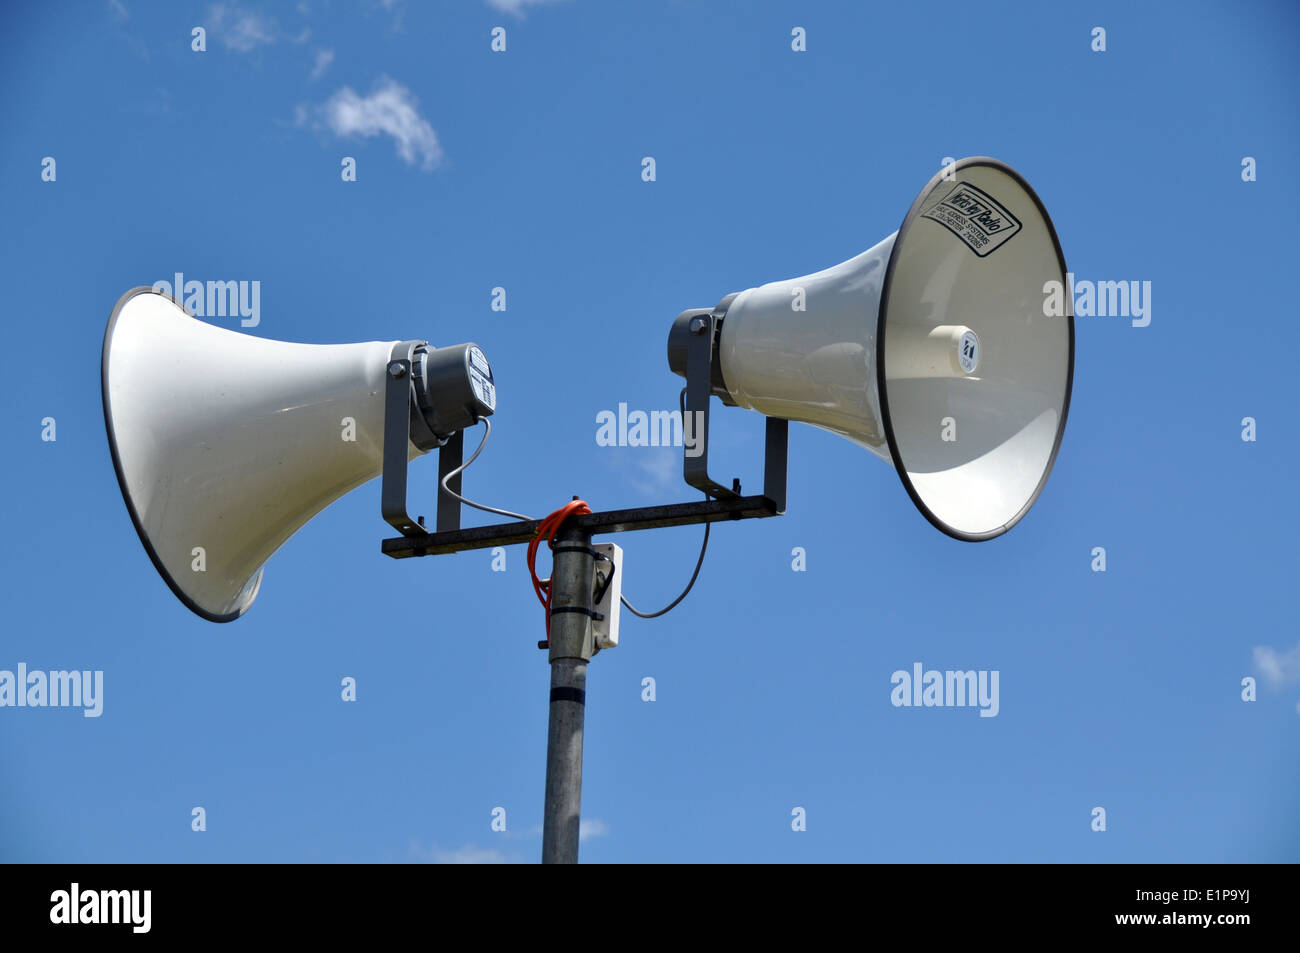 Public address (PA) speakers at a rally Stock Photo